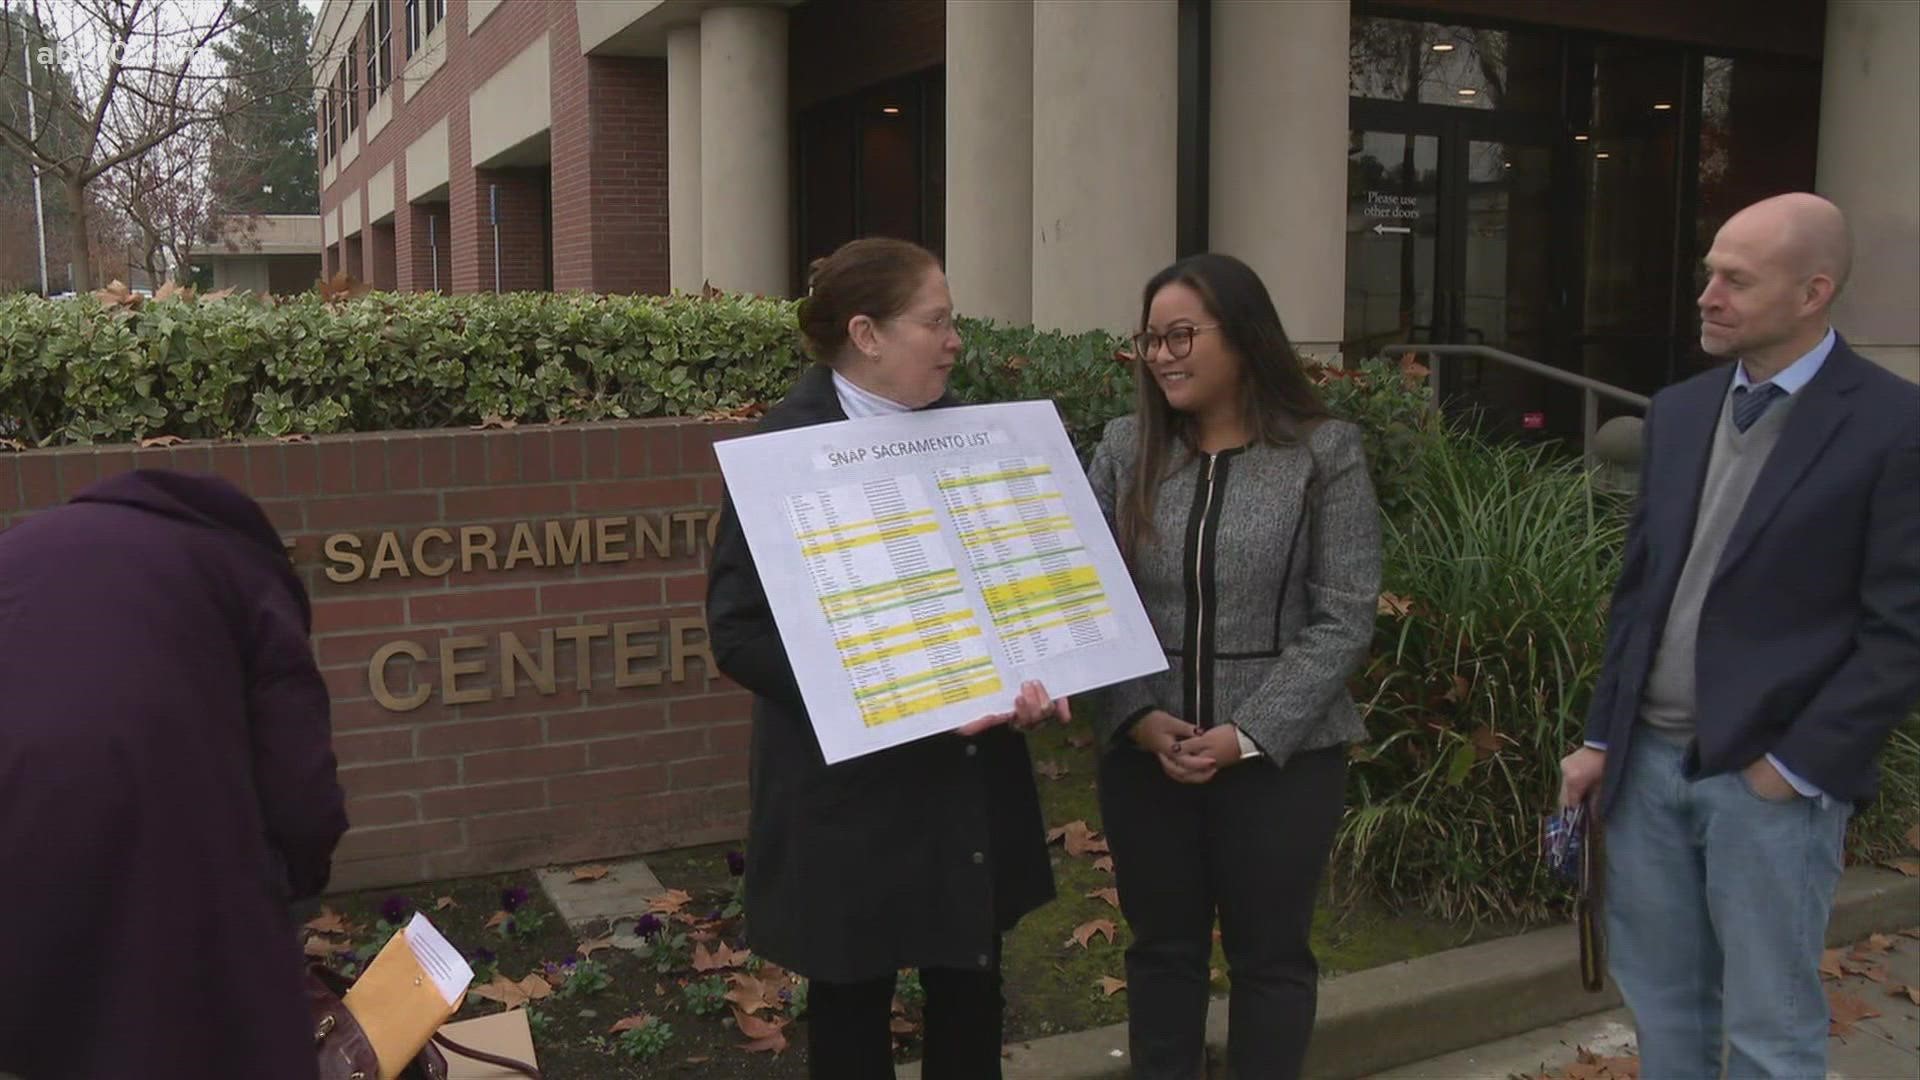 Outside the Catholic Diocese of Sacramento's Chancery Office, members of SNAP urged for the Vatican to continue identifying accused sexual abusers among their ranks.